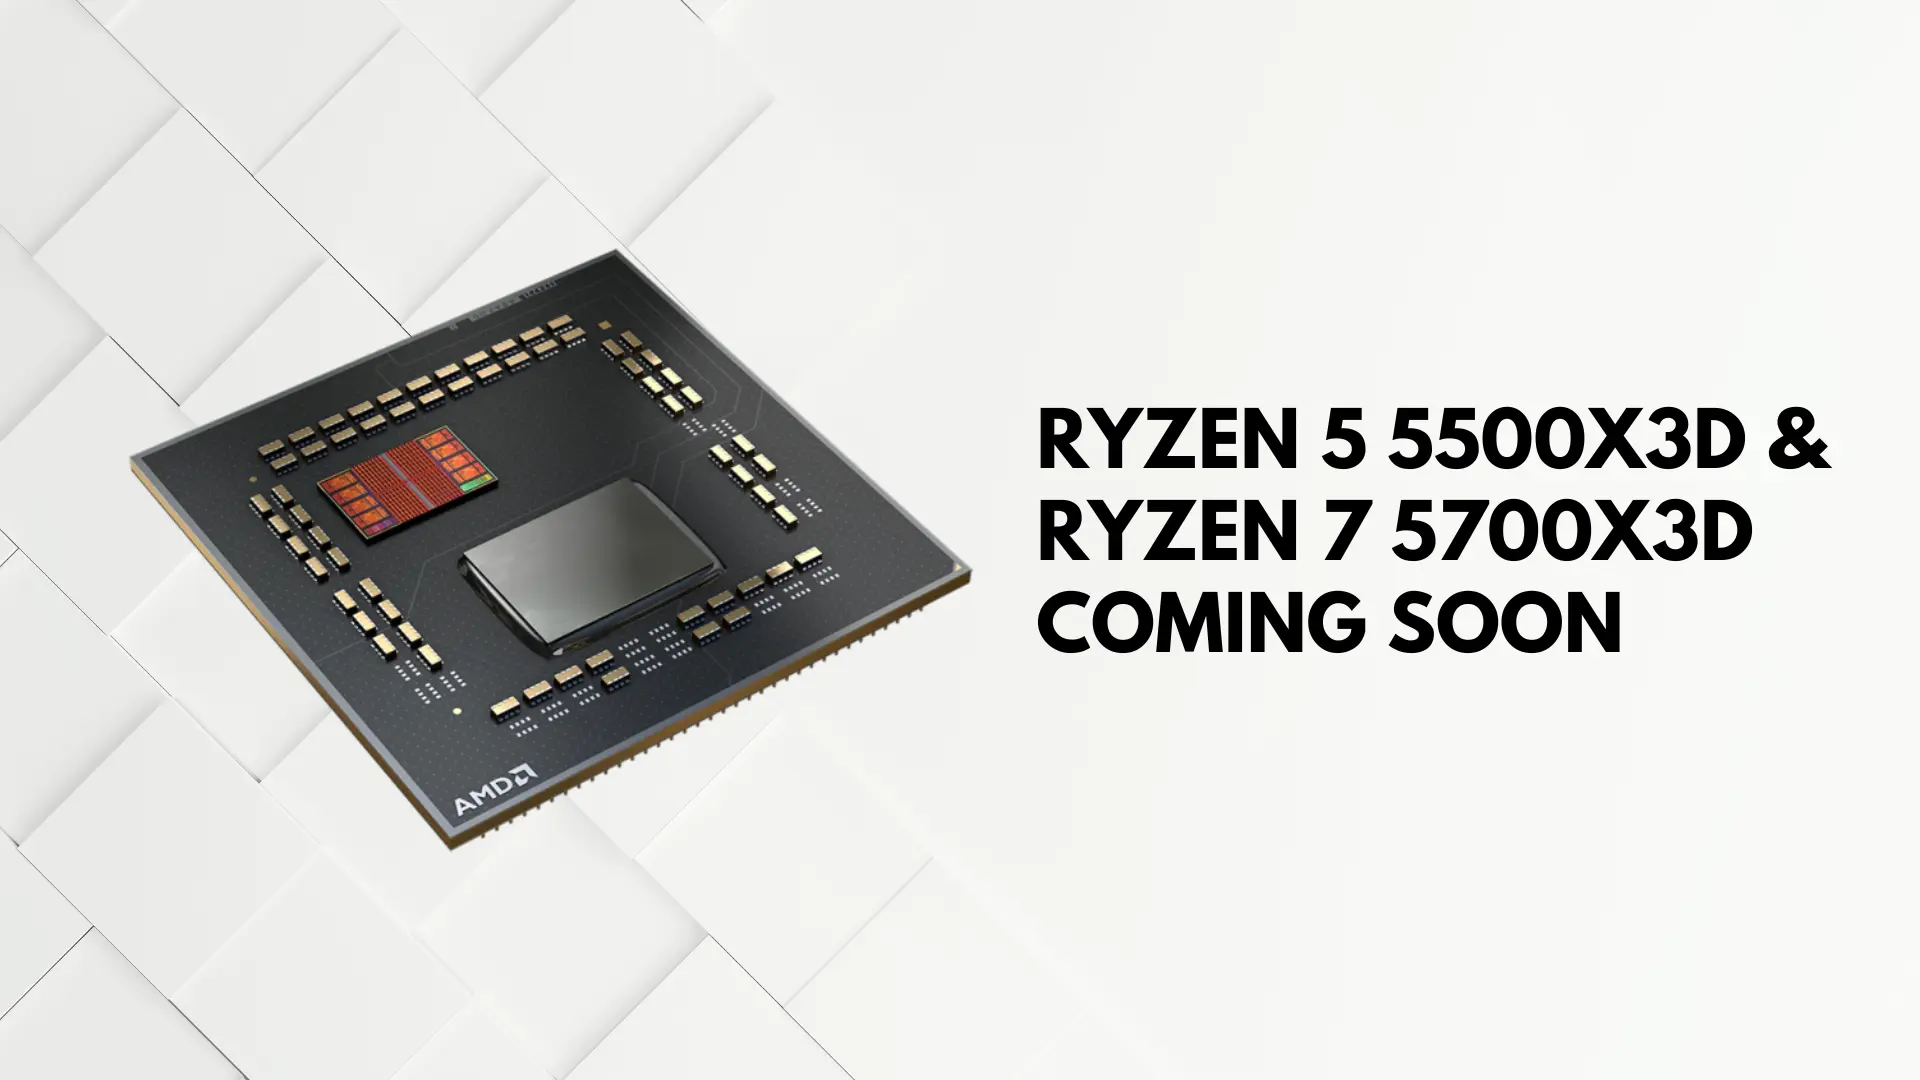 AMD brings new life to AM4 platform with Ryzen 5 5500X3D and Ryzen 7 5700X3D